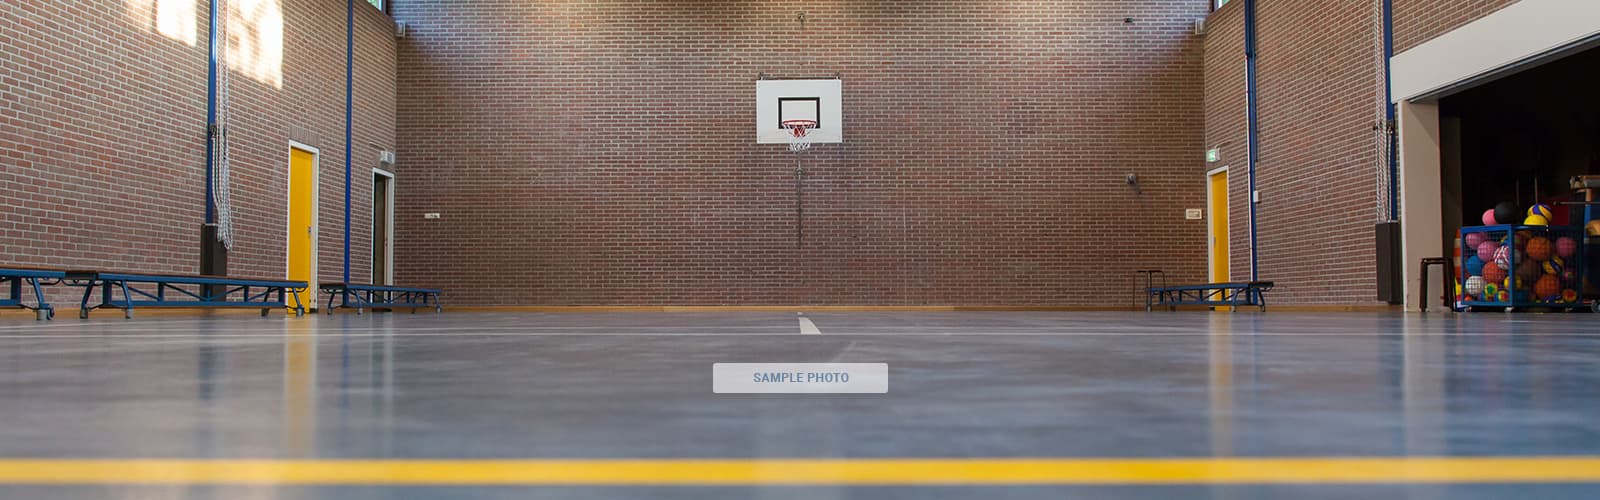 Chaparral Elementary School Gym in Albuquerque New Mexico - undefined